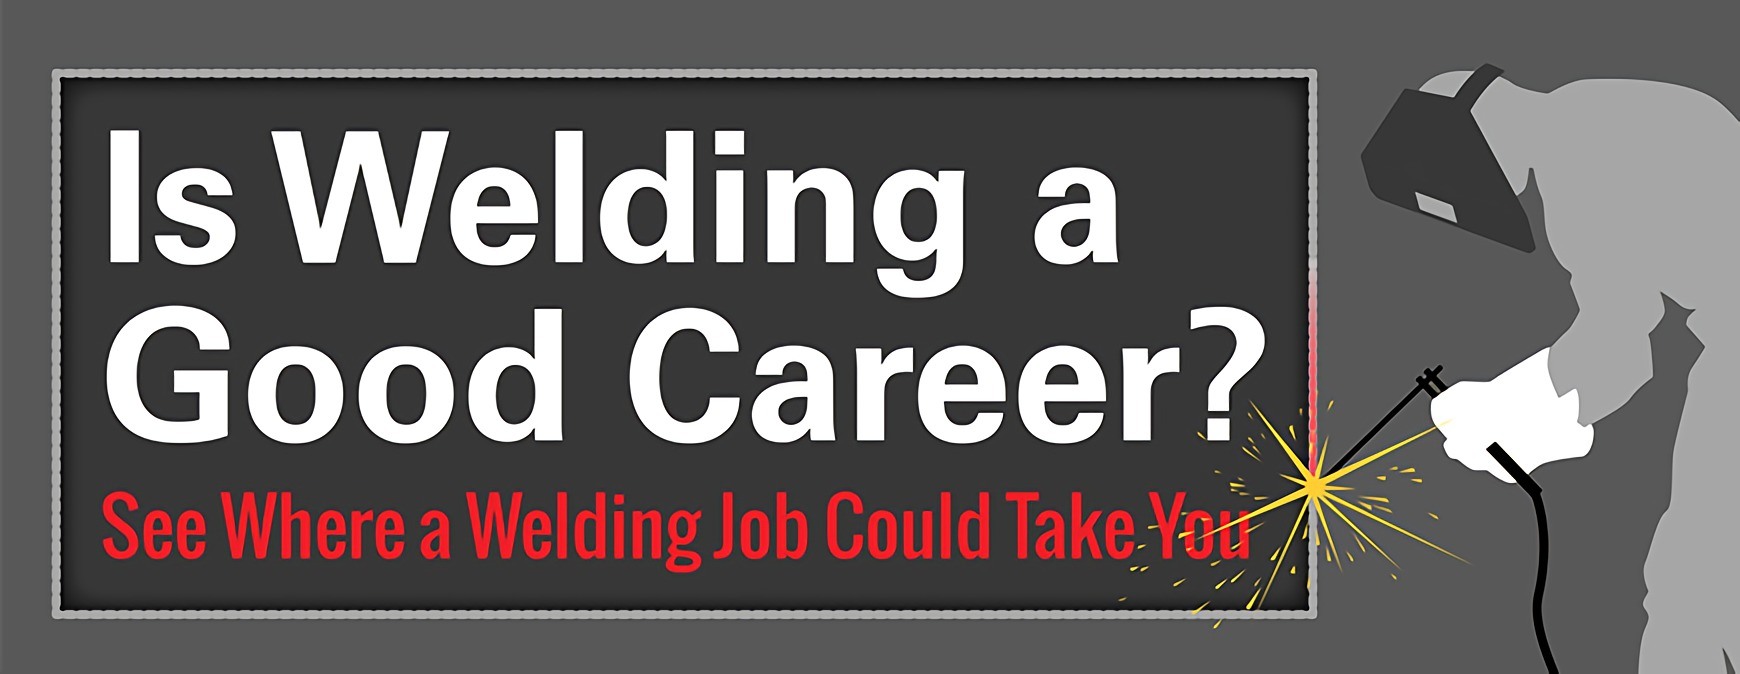 see where a welding job could take you